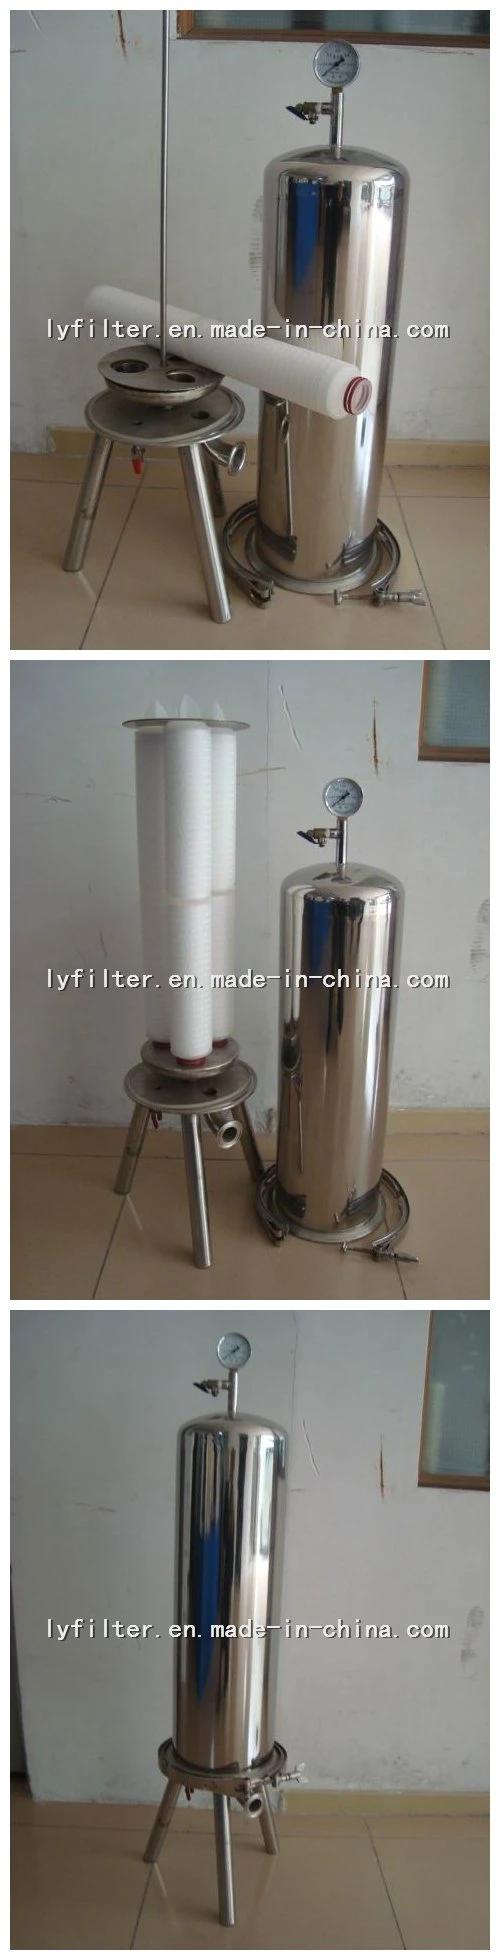 Wine Liquid Filter Stainless Steel Filter Housing for Filter Elements